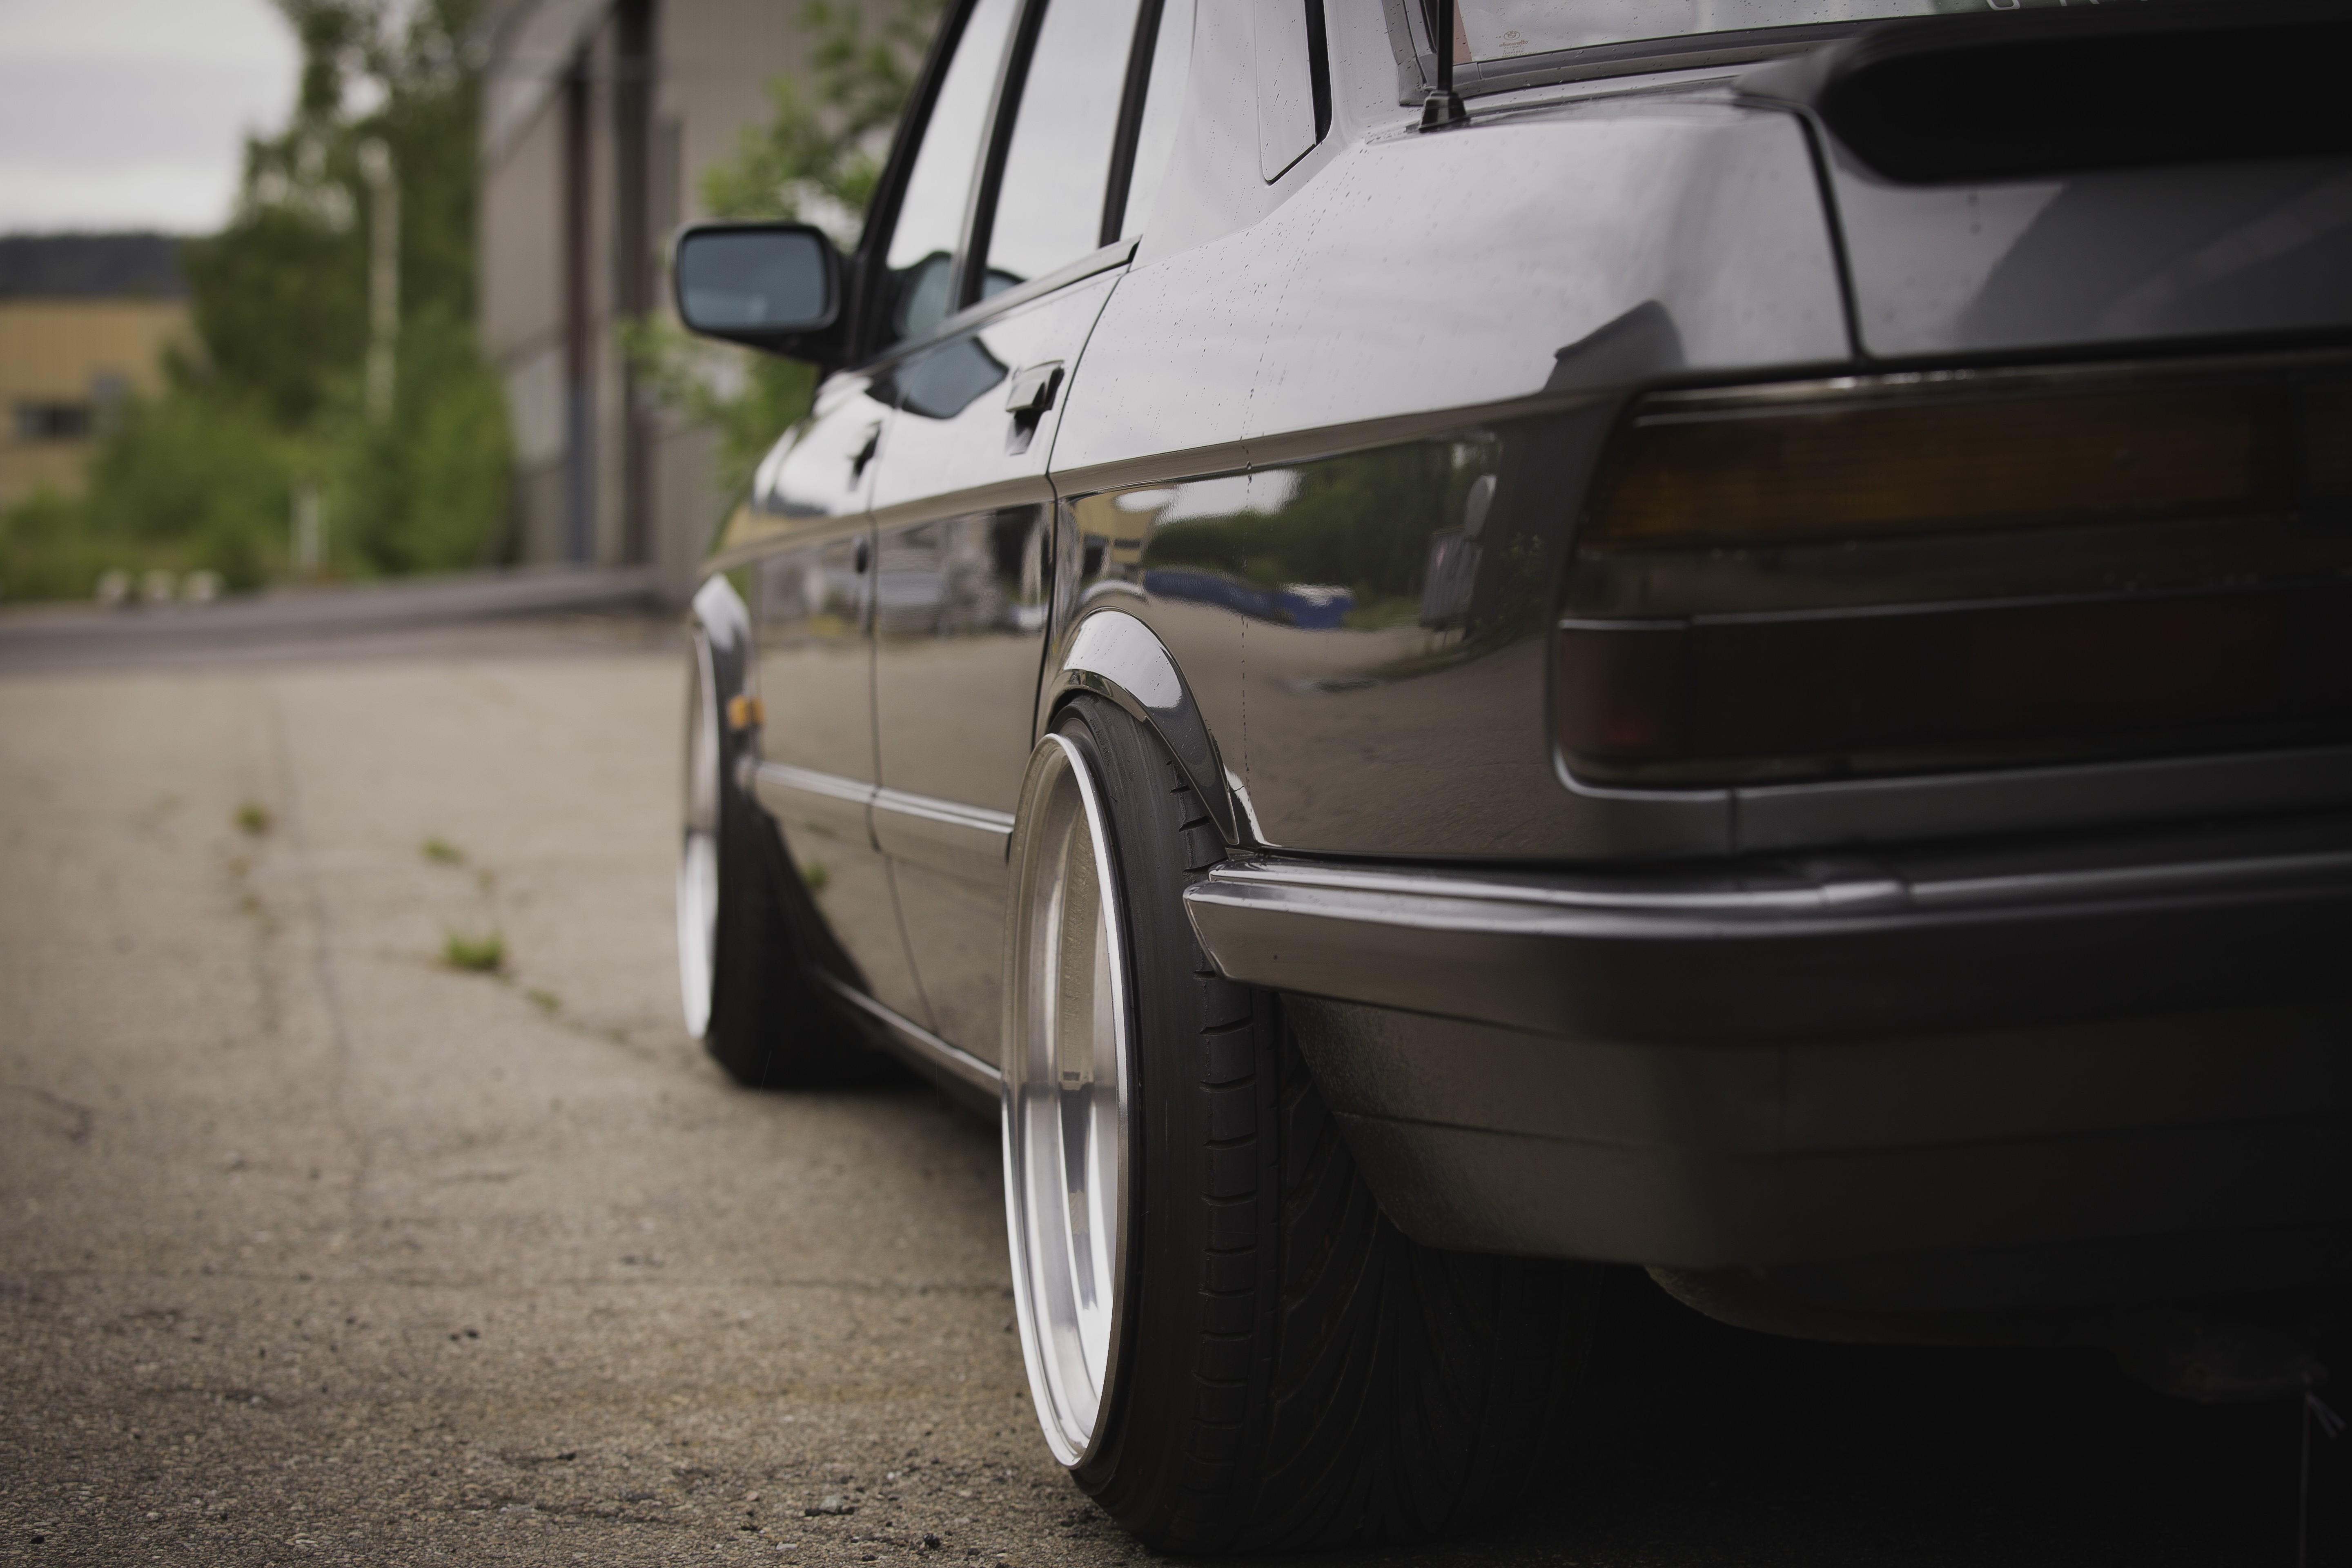 HD wallpaper, Summer, Norway, Black Cars, Bmw E28, Stanceworks, Bmw 5 Series, Bmw, Car, Save The Wheels, Low Car, Static, Vehicle